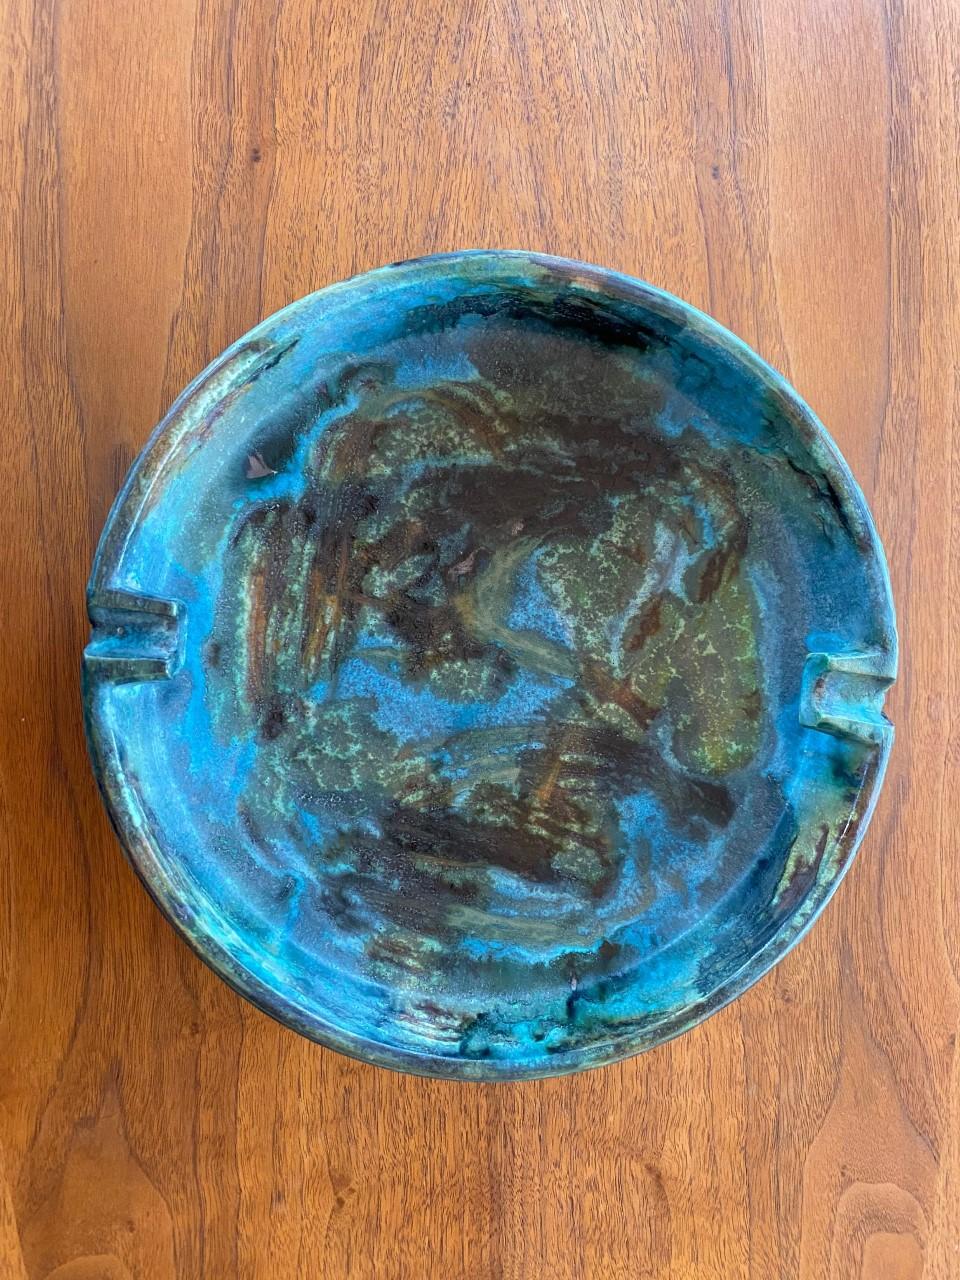 Beautiful signature piece. Mid-Century Modern 1960s Italian pottery ashtray or bowl designed by Alvino Bagni for Raymor. It has a striking rich 